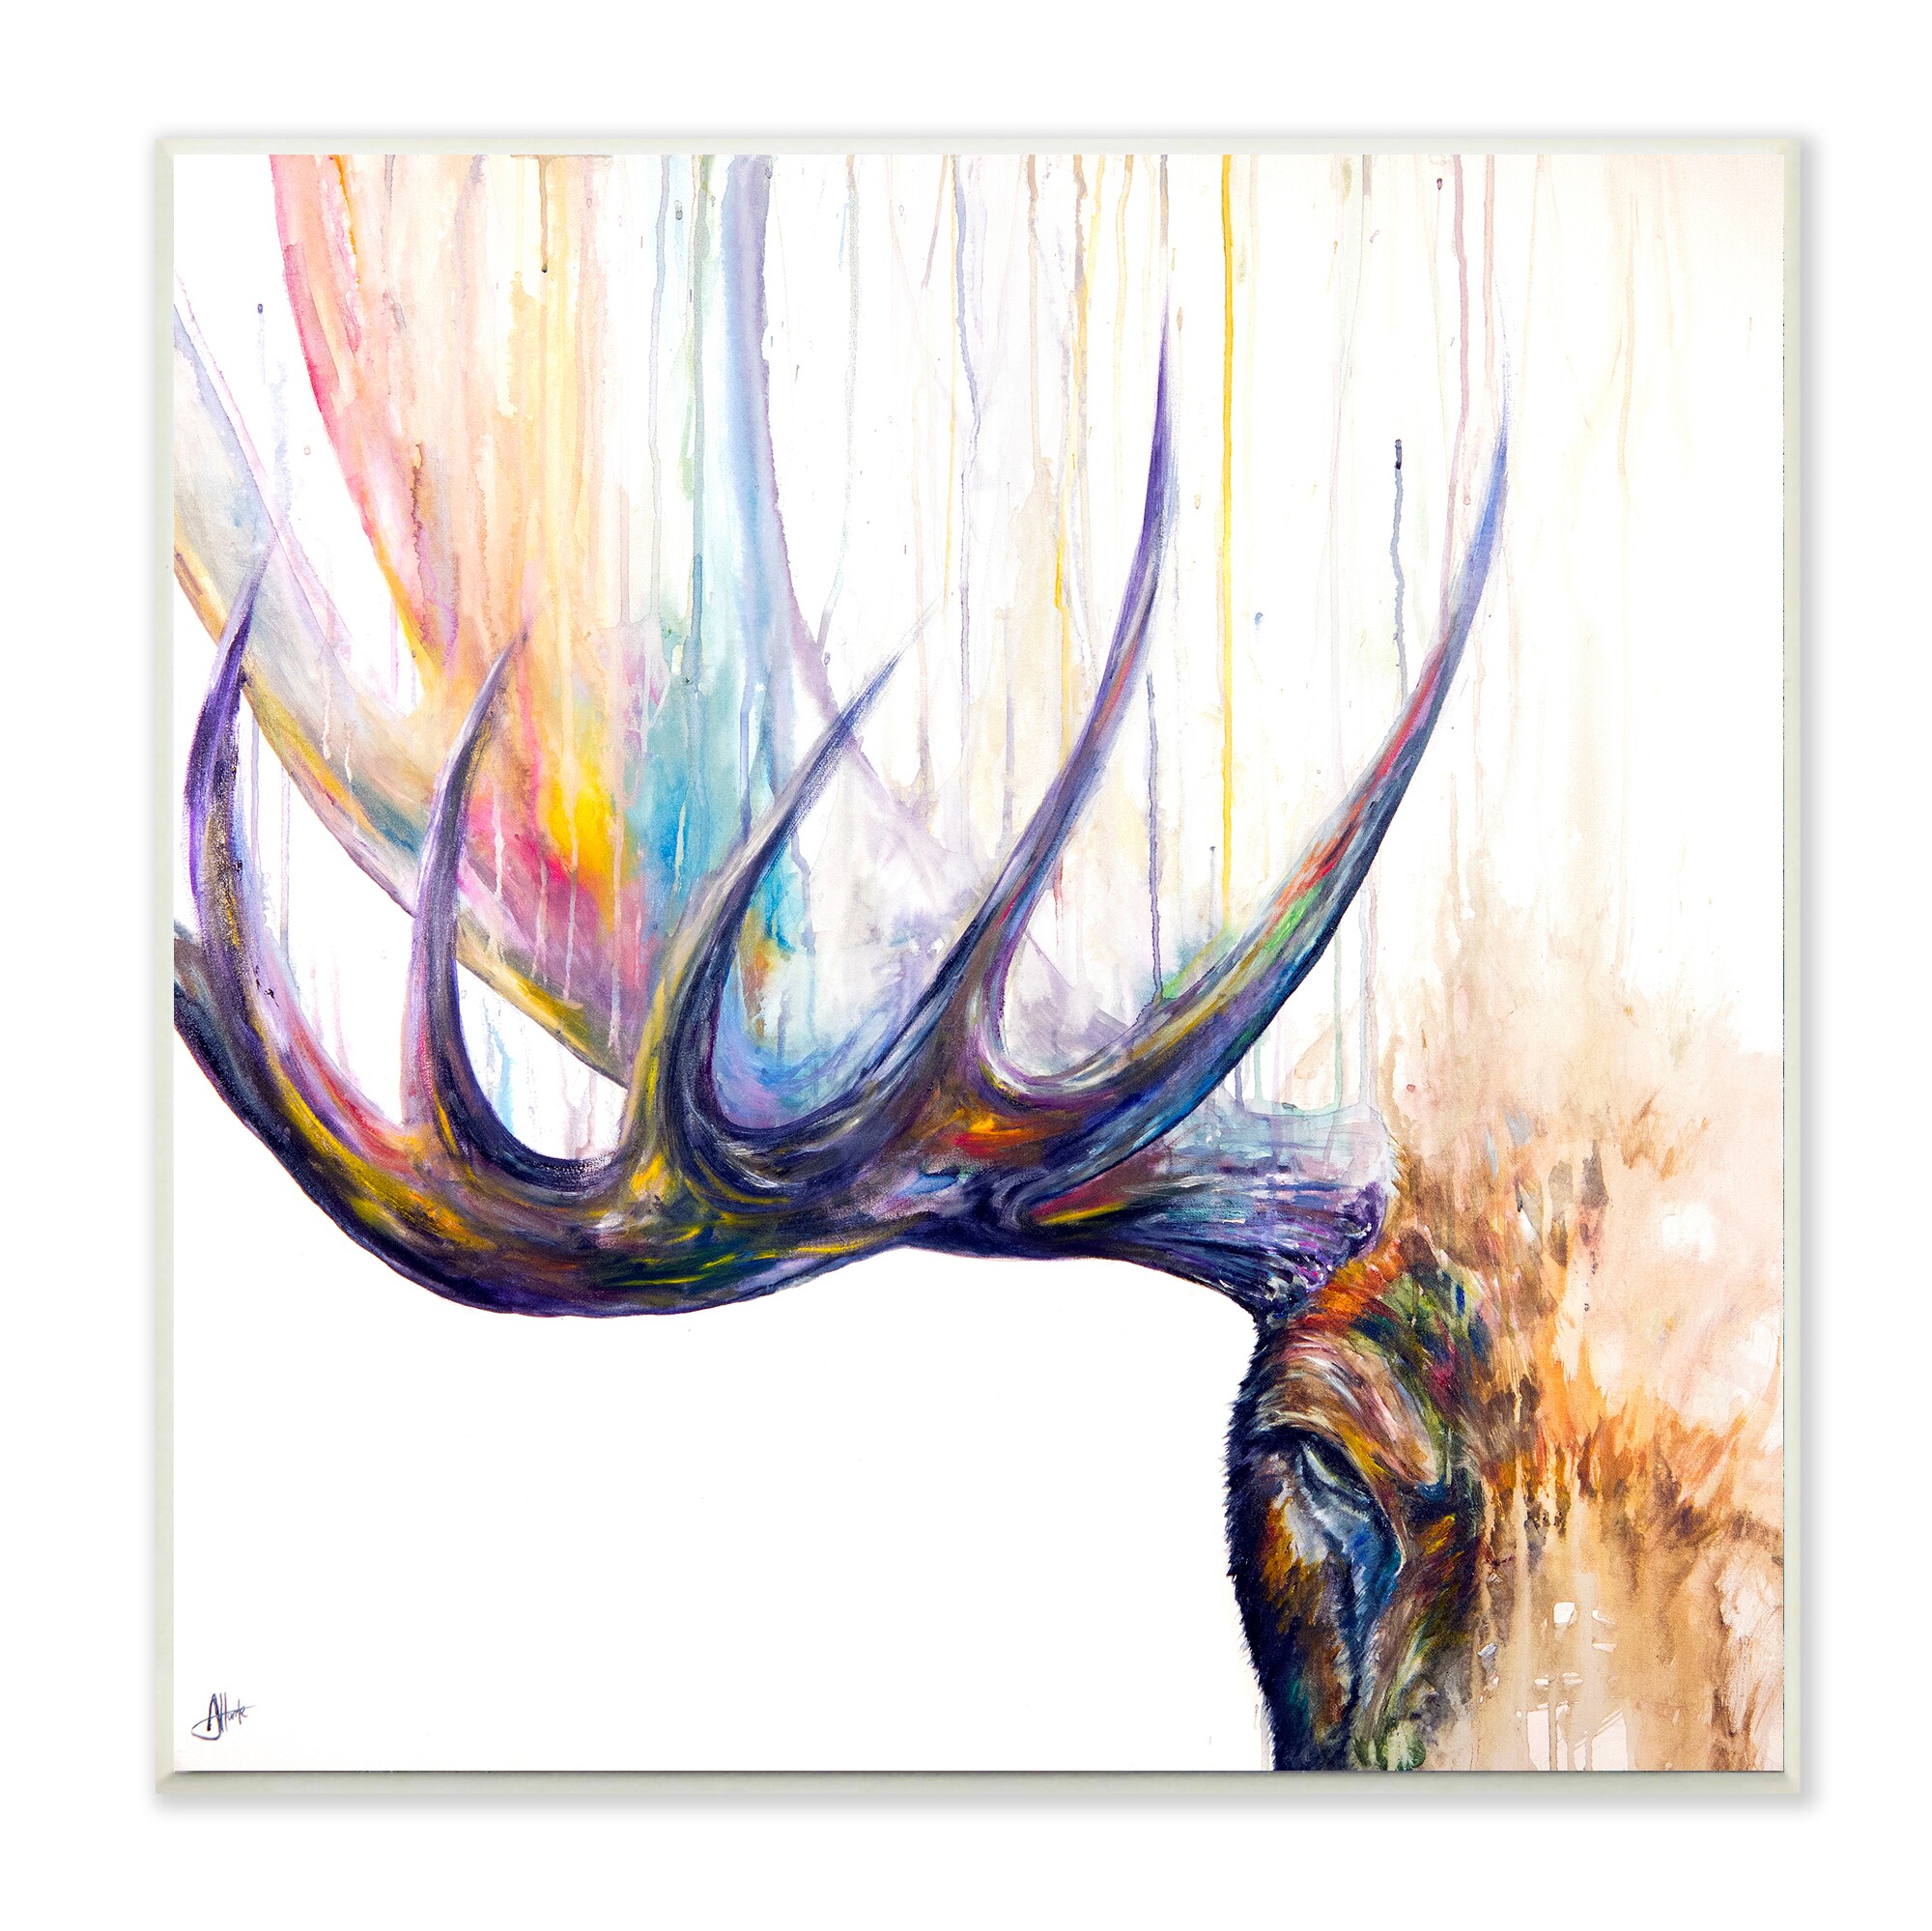 The Stupell Home Decor Rainbow Watercolor Dripping Moose Antlers Wall Plaque Art, Size: 12 x 12